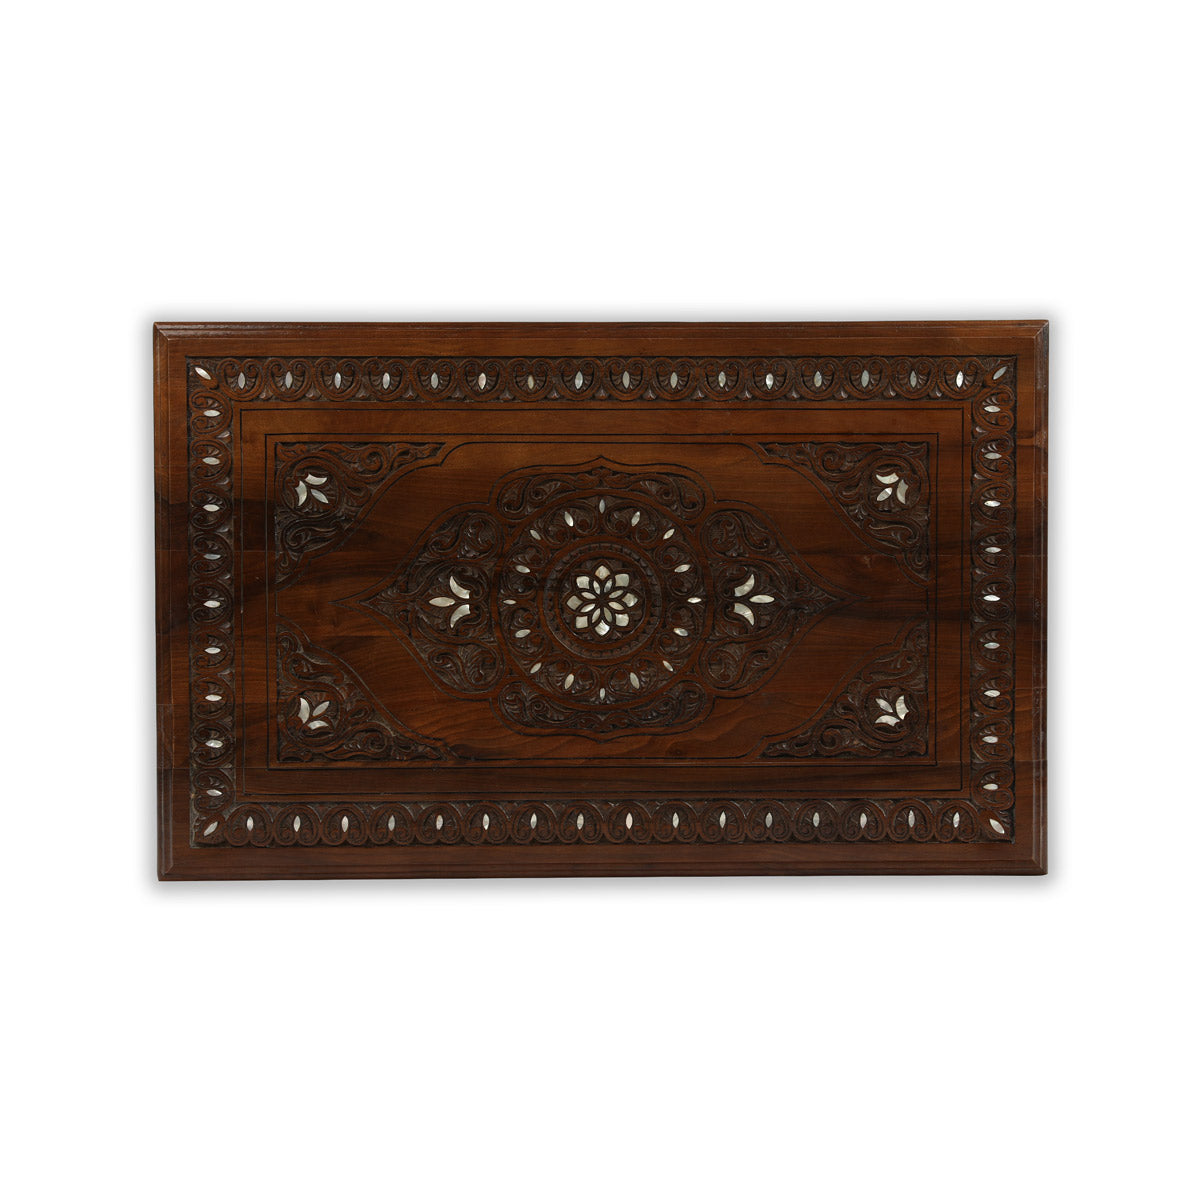 Table Top View of Ornate Rectangular Table